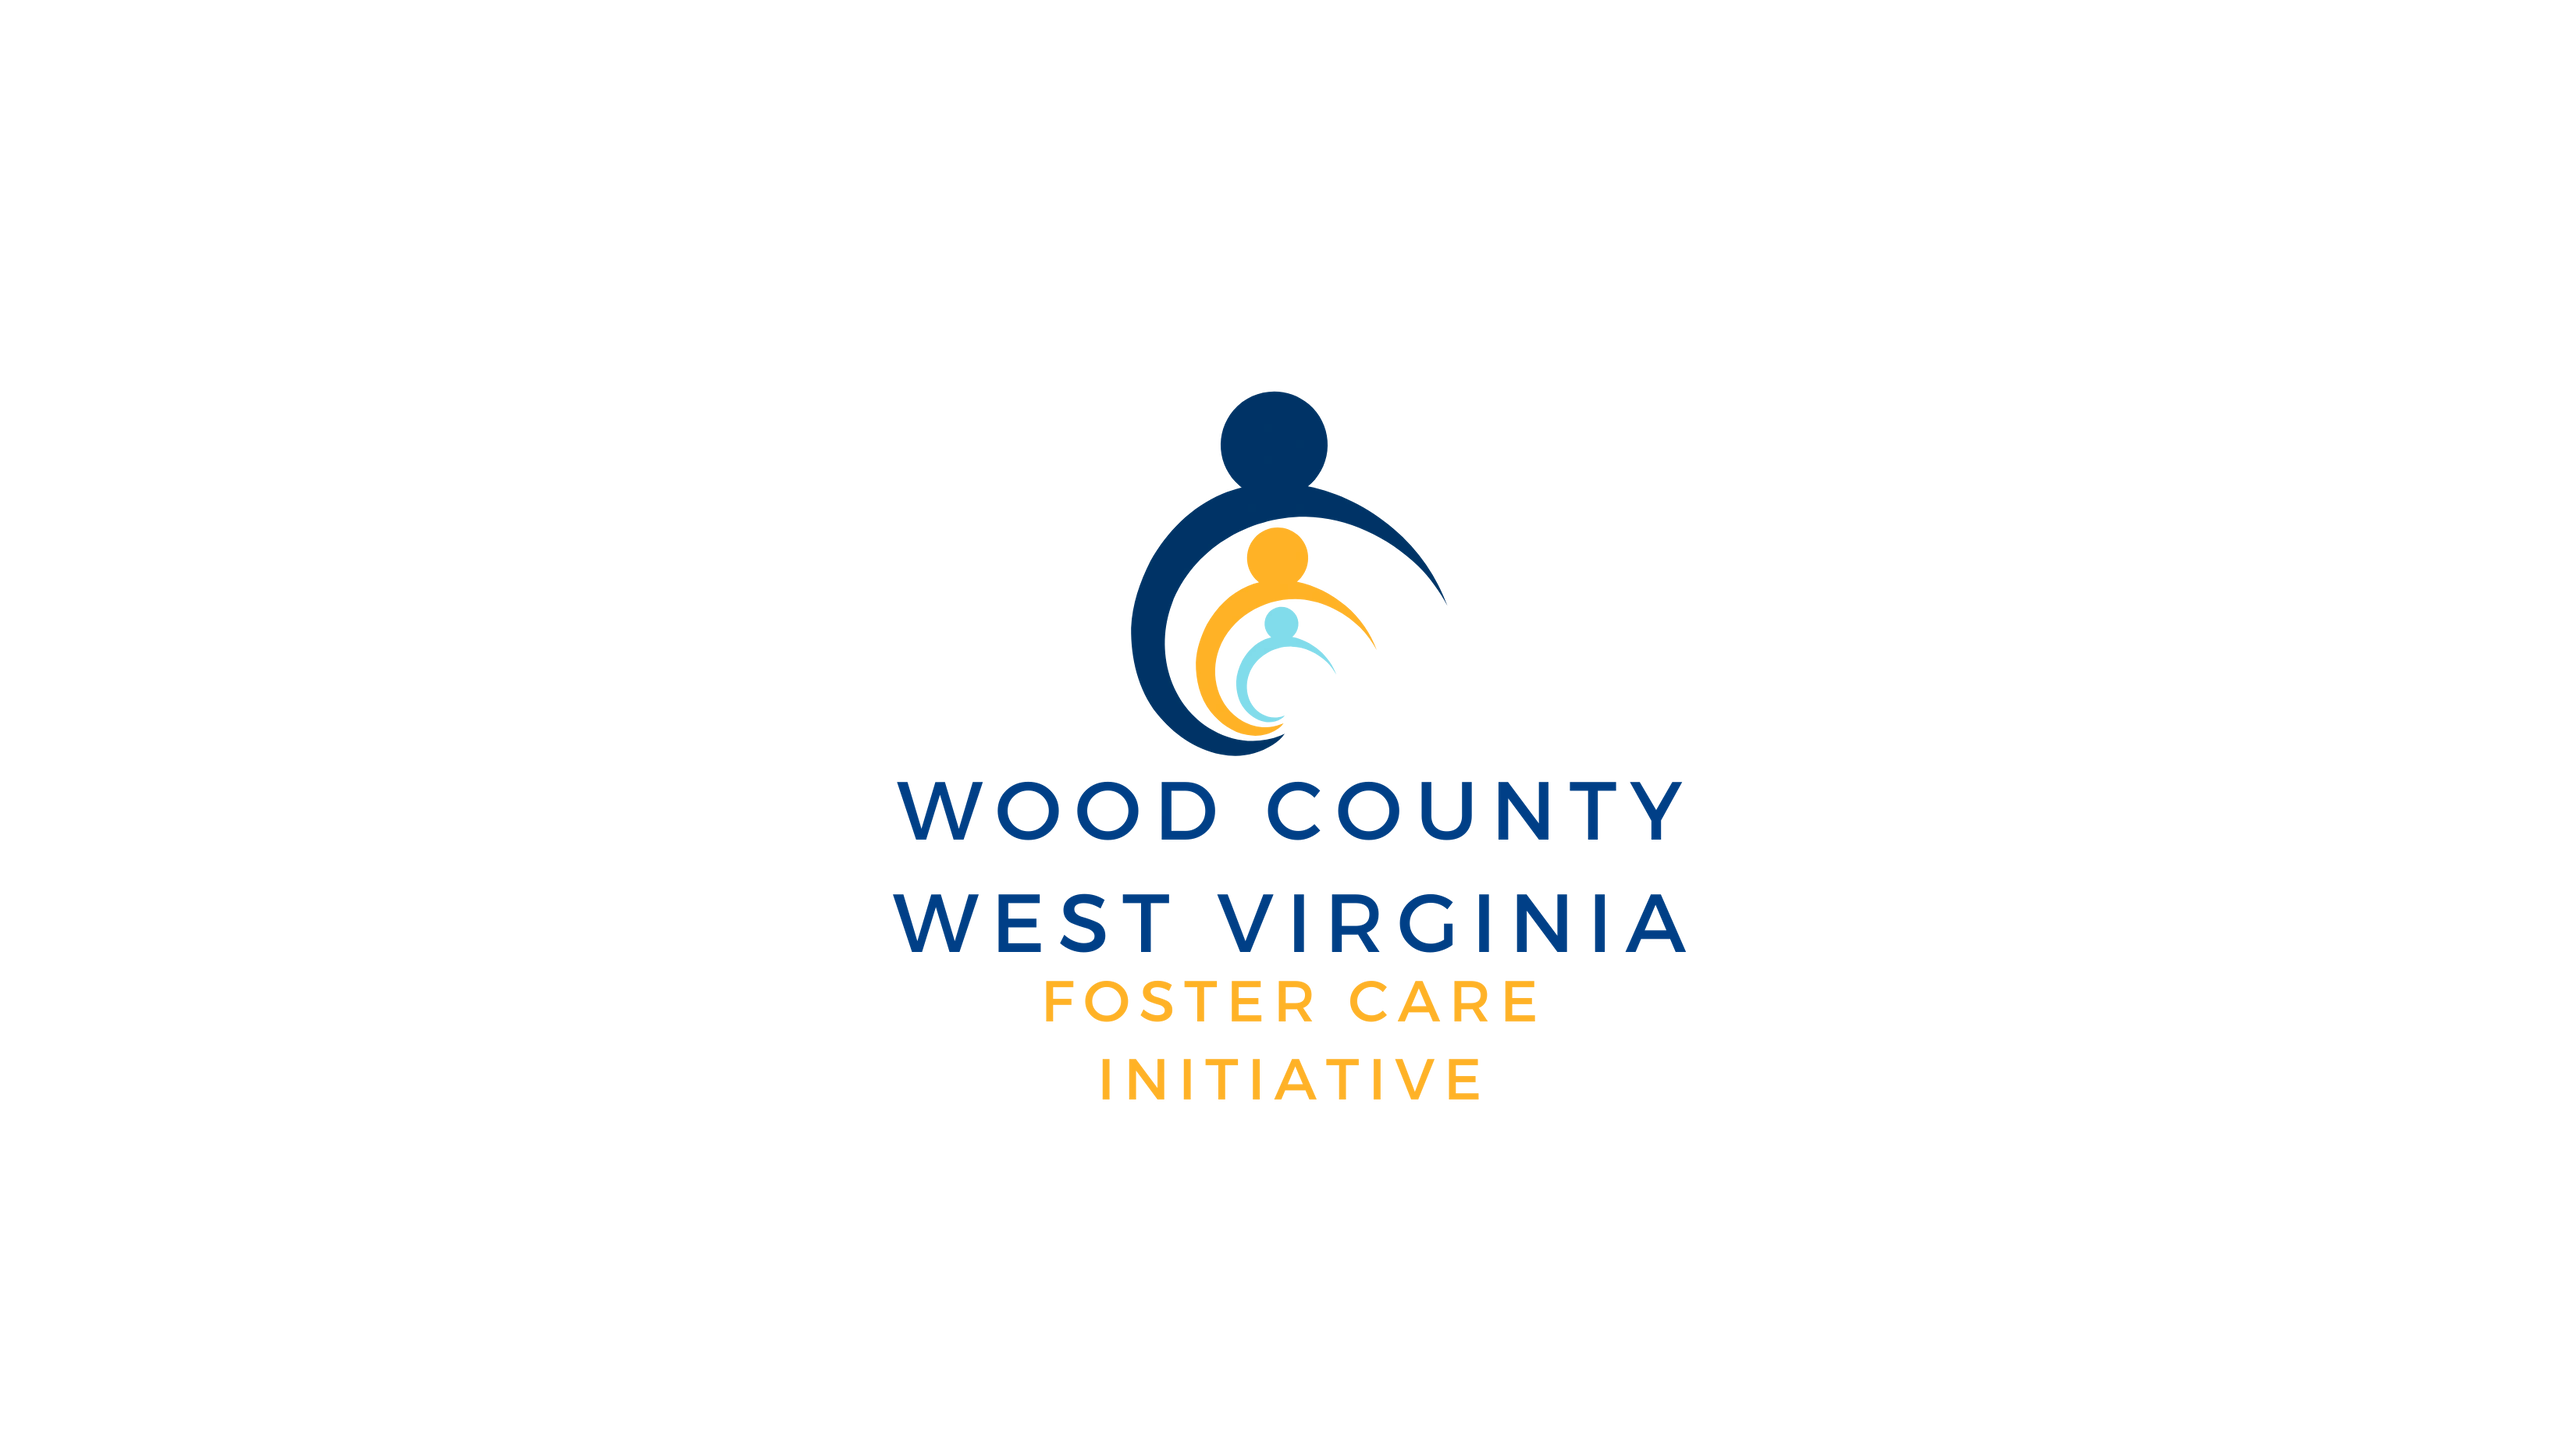 Wood County West Virginia Foster Care